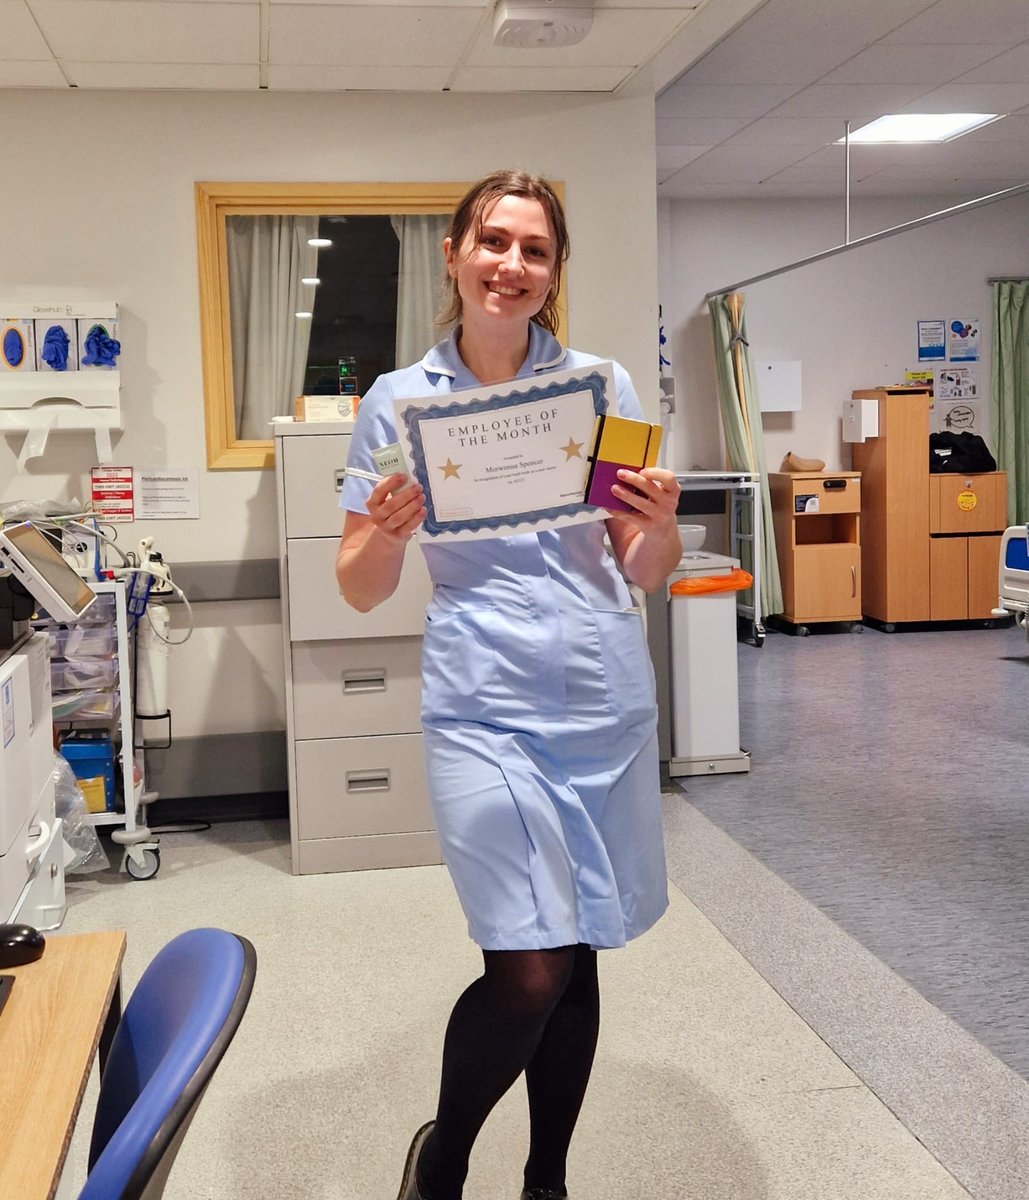 Massive congratulations to our employee of the month Morwenna, who always goes above and beyond for her patients and keeps the team positive! @cardiologymatr1 @TntTracy73 @parkerkarenj